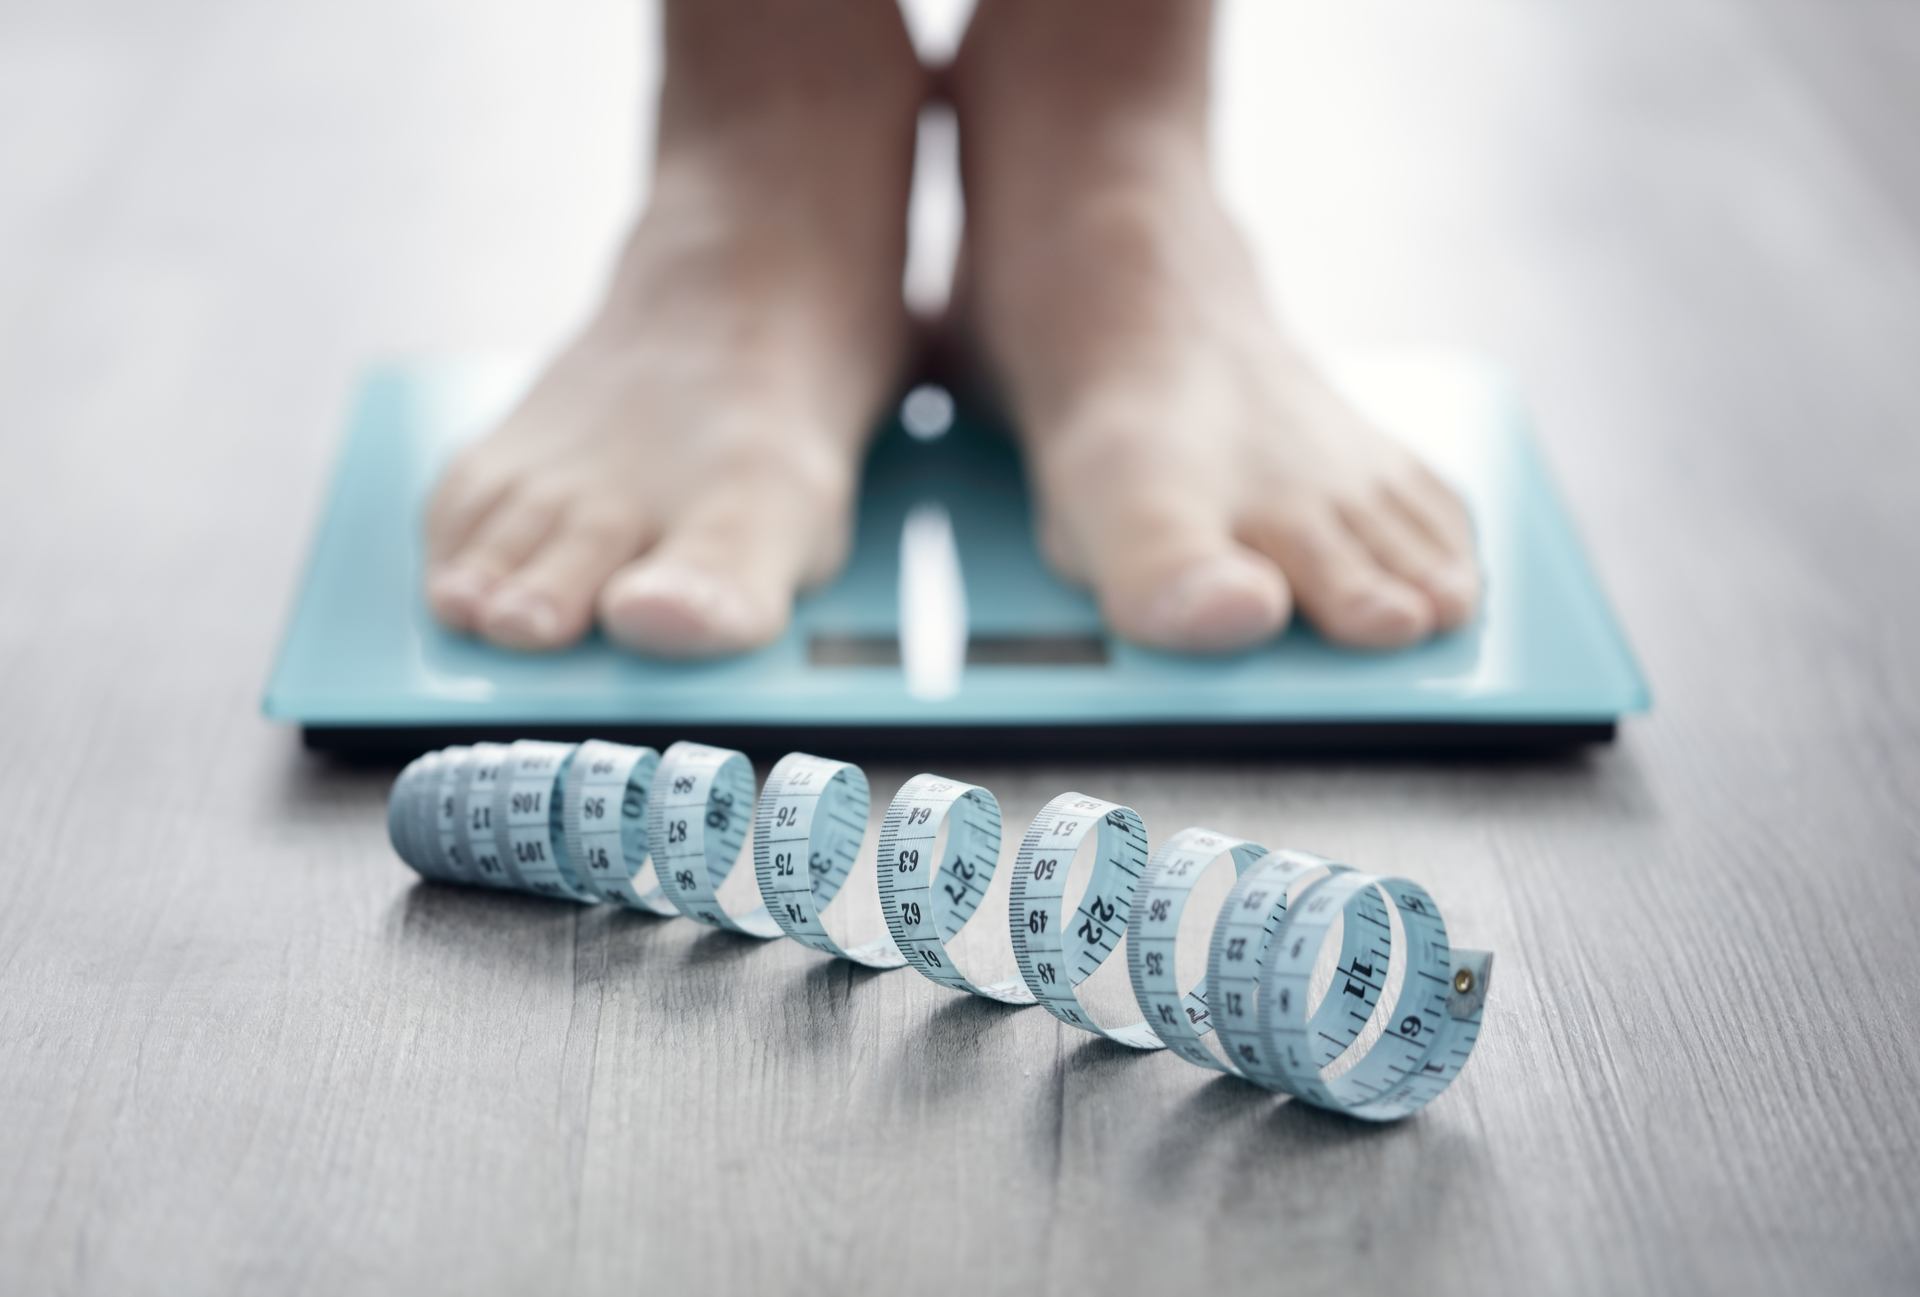 Closeup of a person’s feet on a scale with coiled measuring tape in foreground as they consider weight loss surgery. 